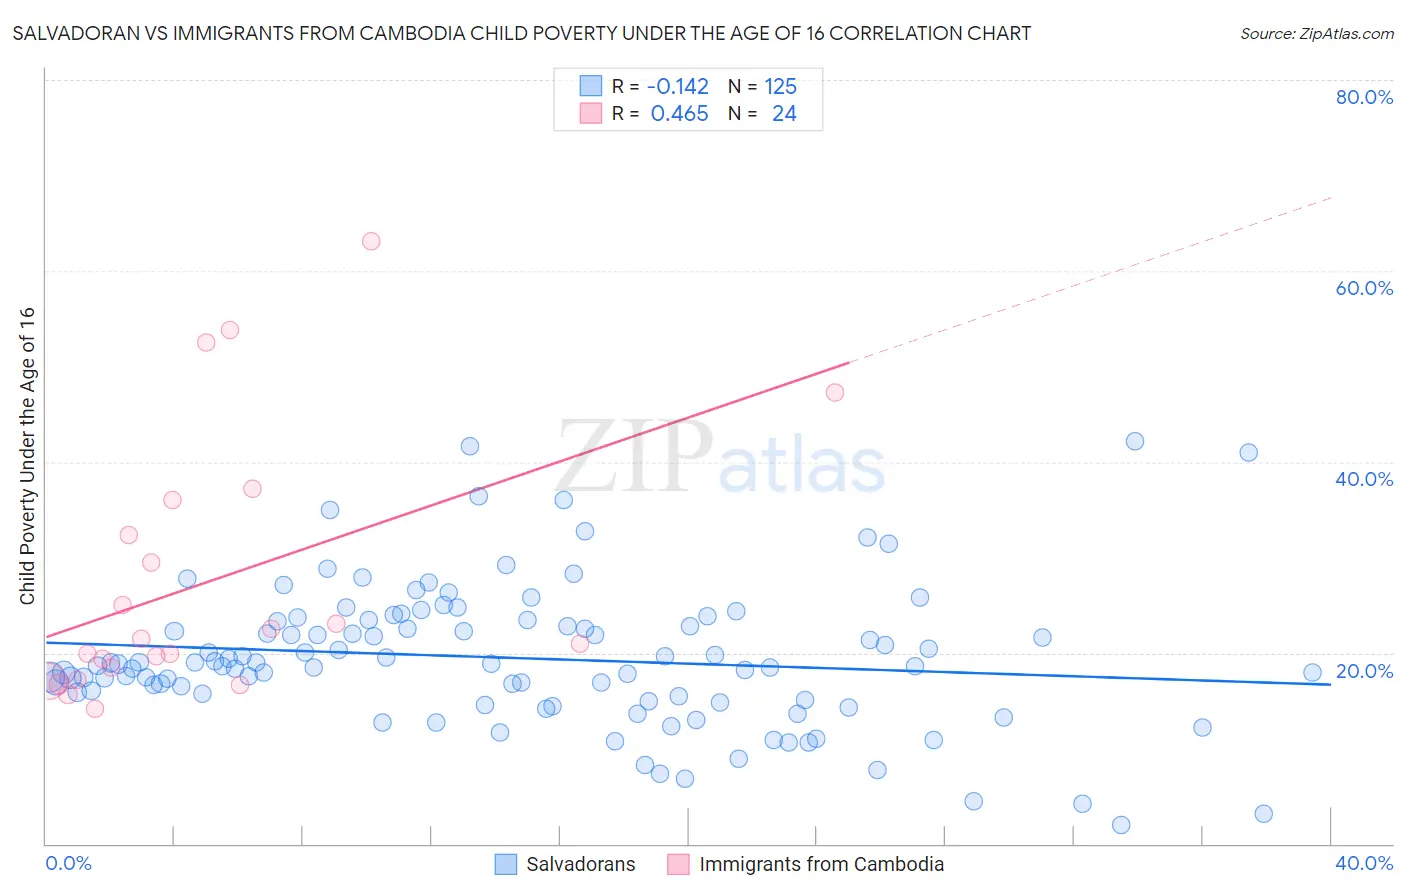 Salvadoran vs Immigrants from Cambodia Child Poverty Under the Age of 16